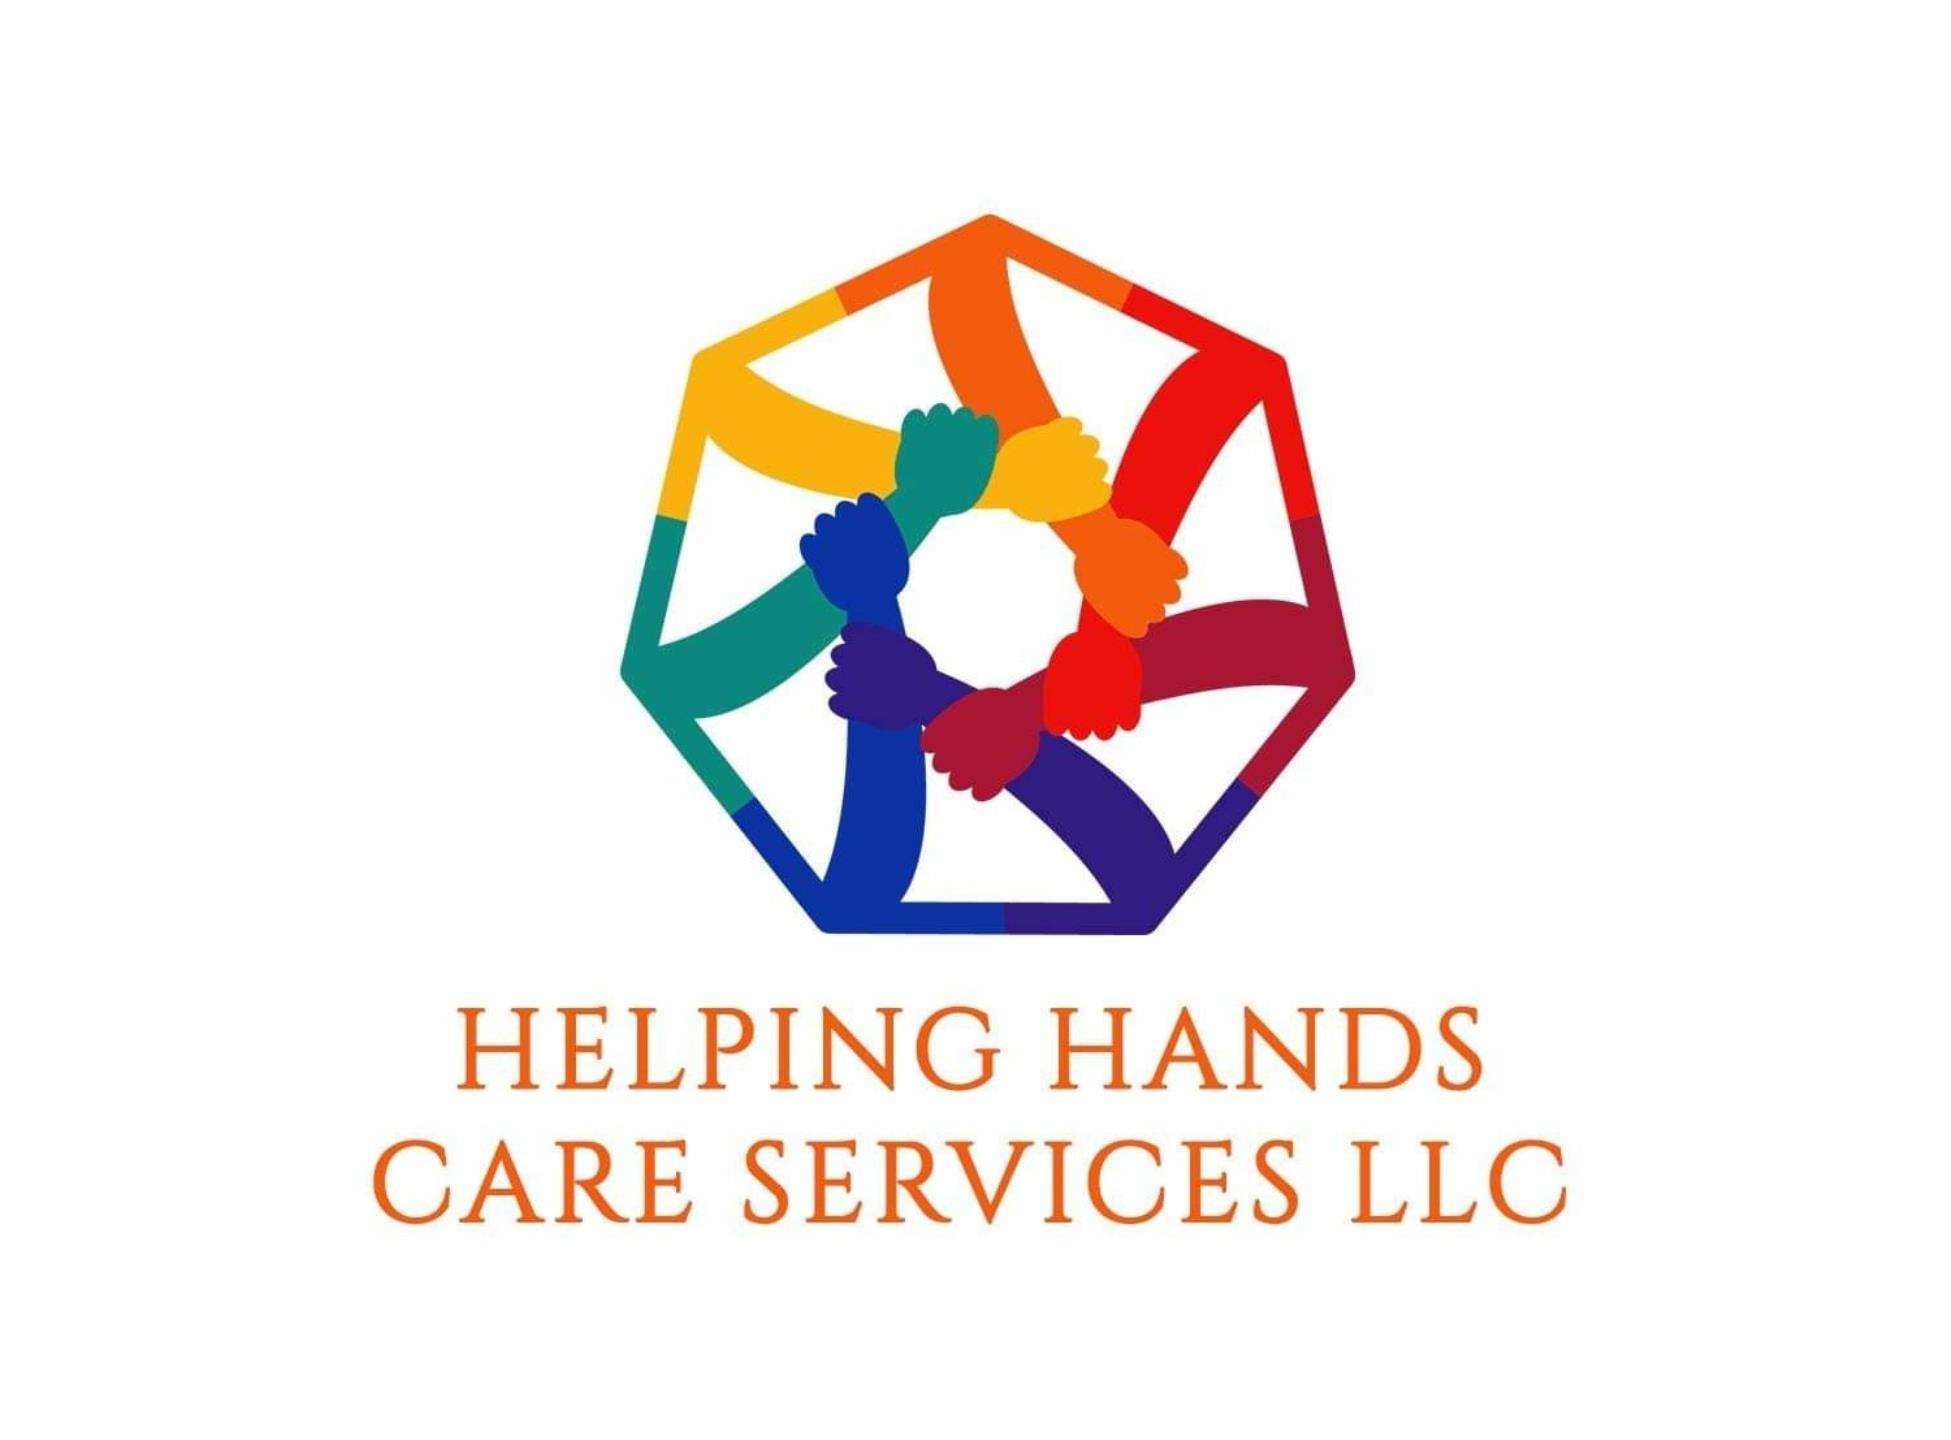 Helping Hands Care Services LLC Logo